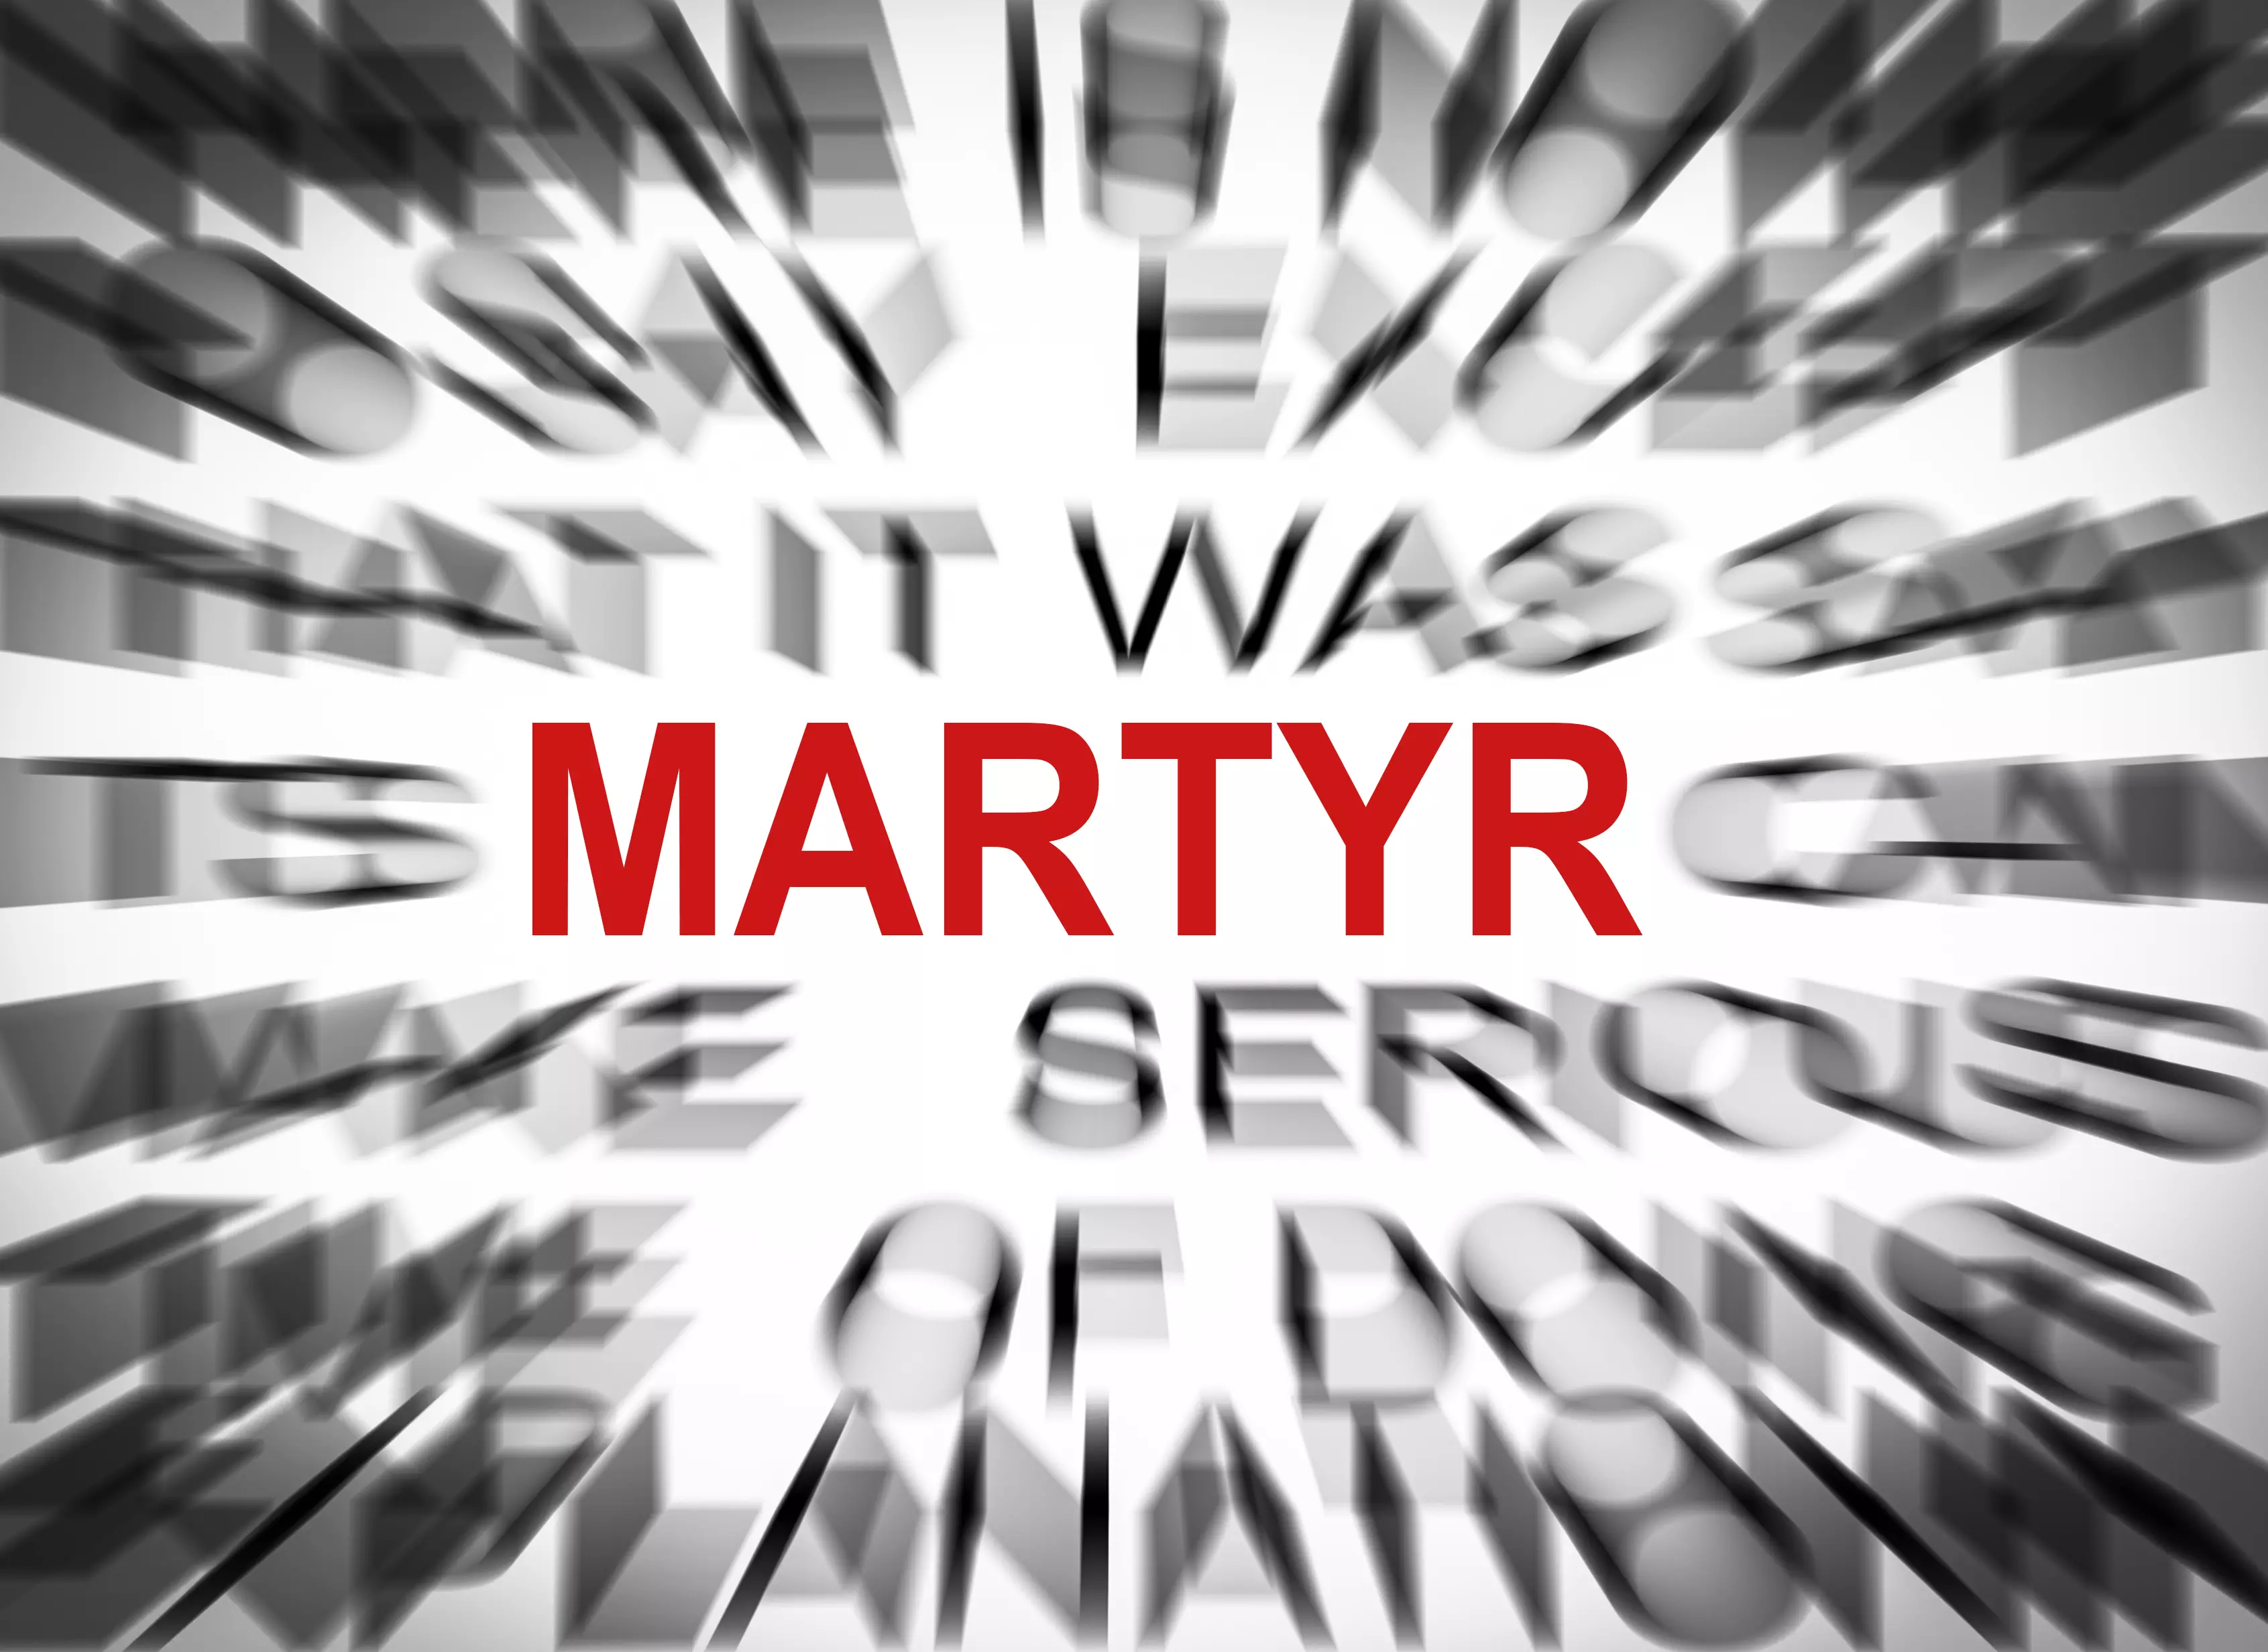 Are you a CEO or a Martyr?